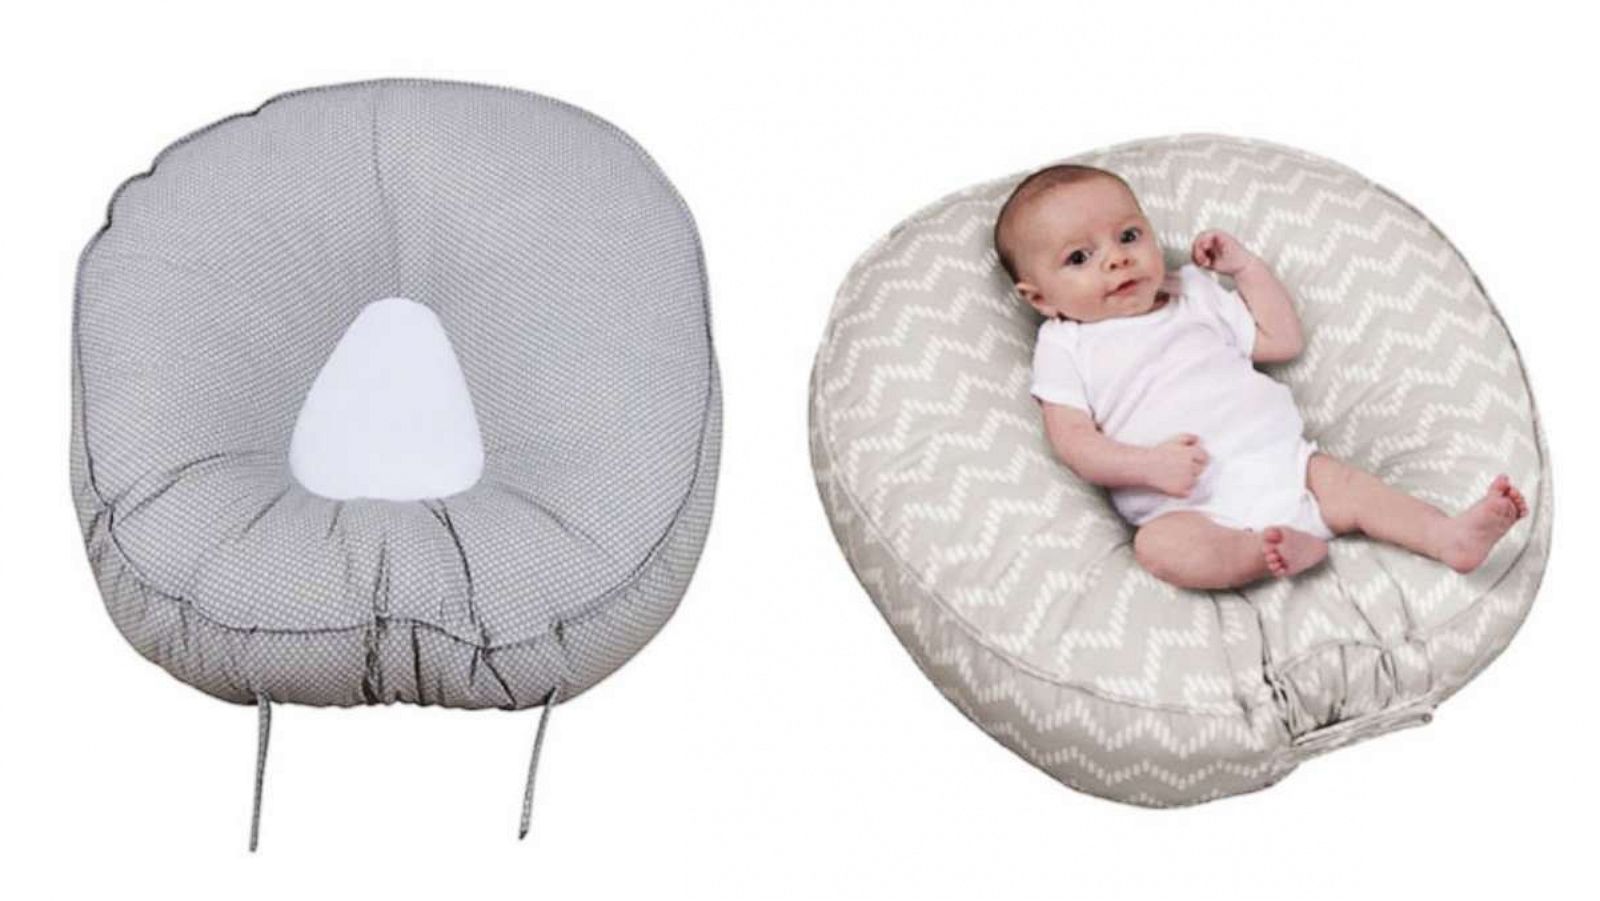 Safety commission warns consumers to stop using certain infant loungers,  investigating 2 deaths - ABC News